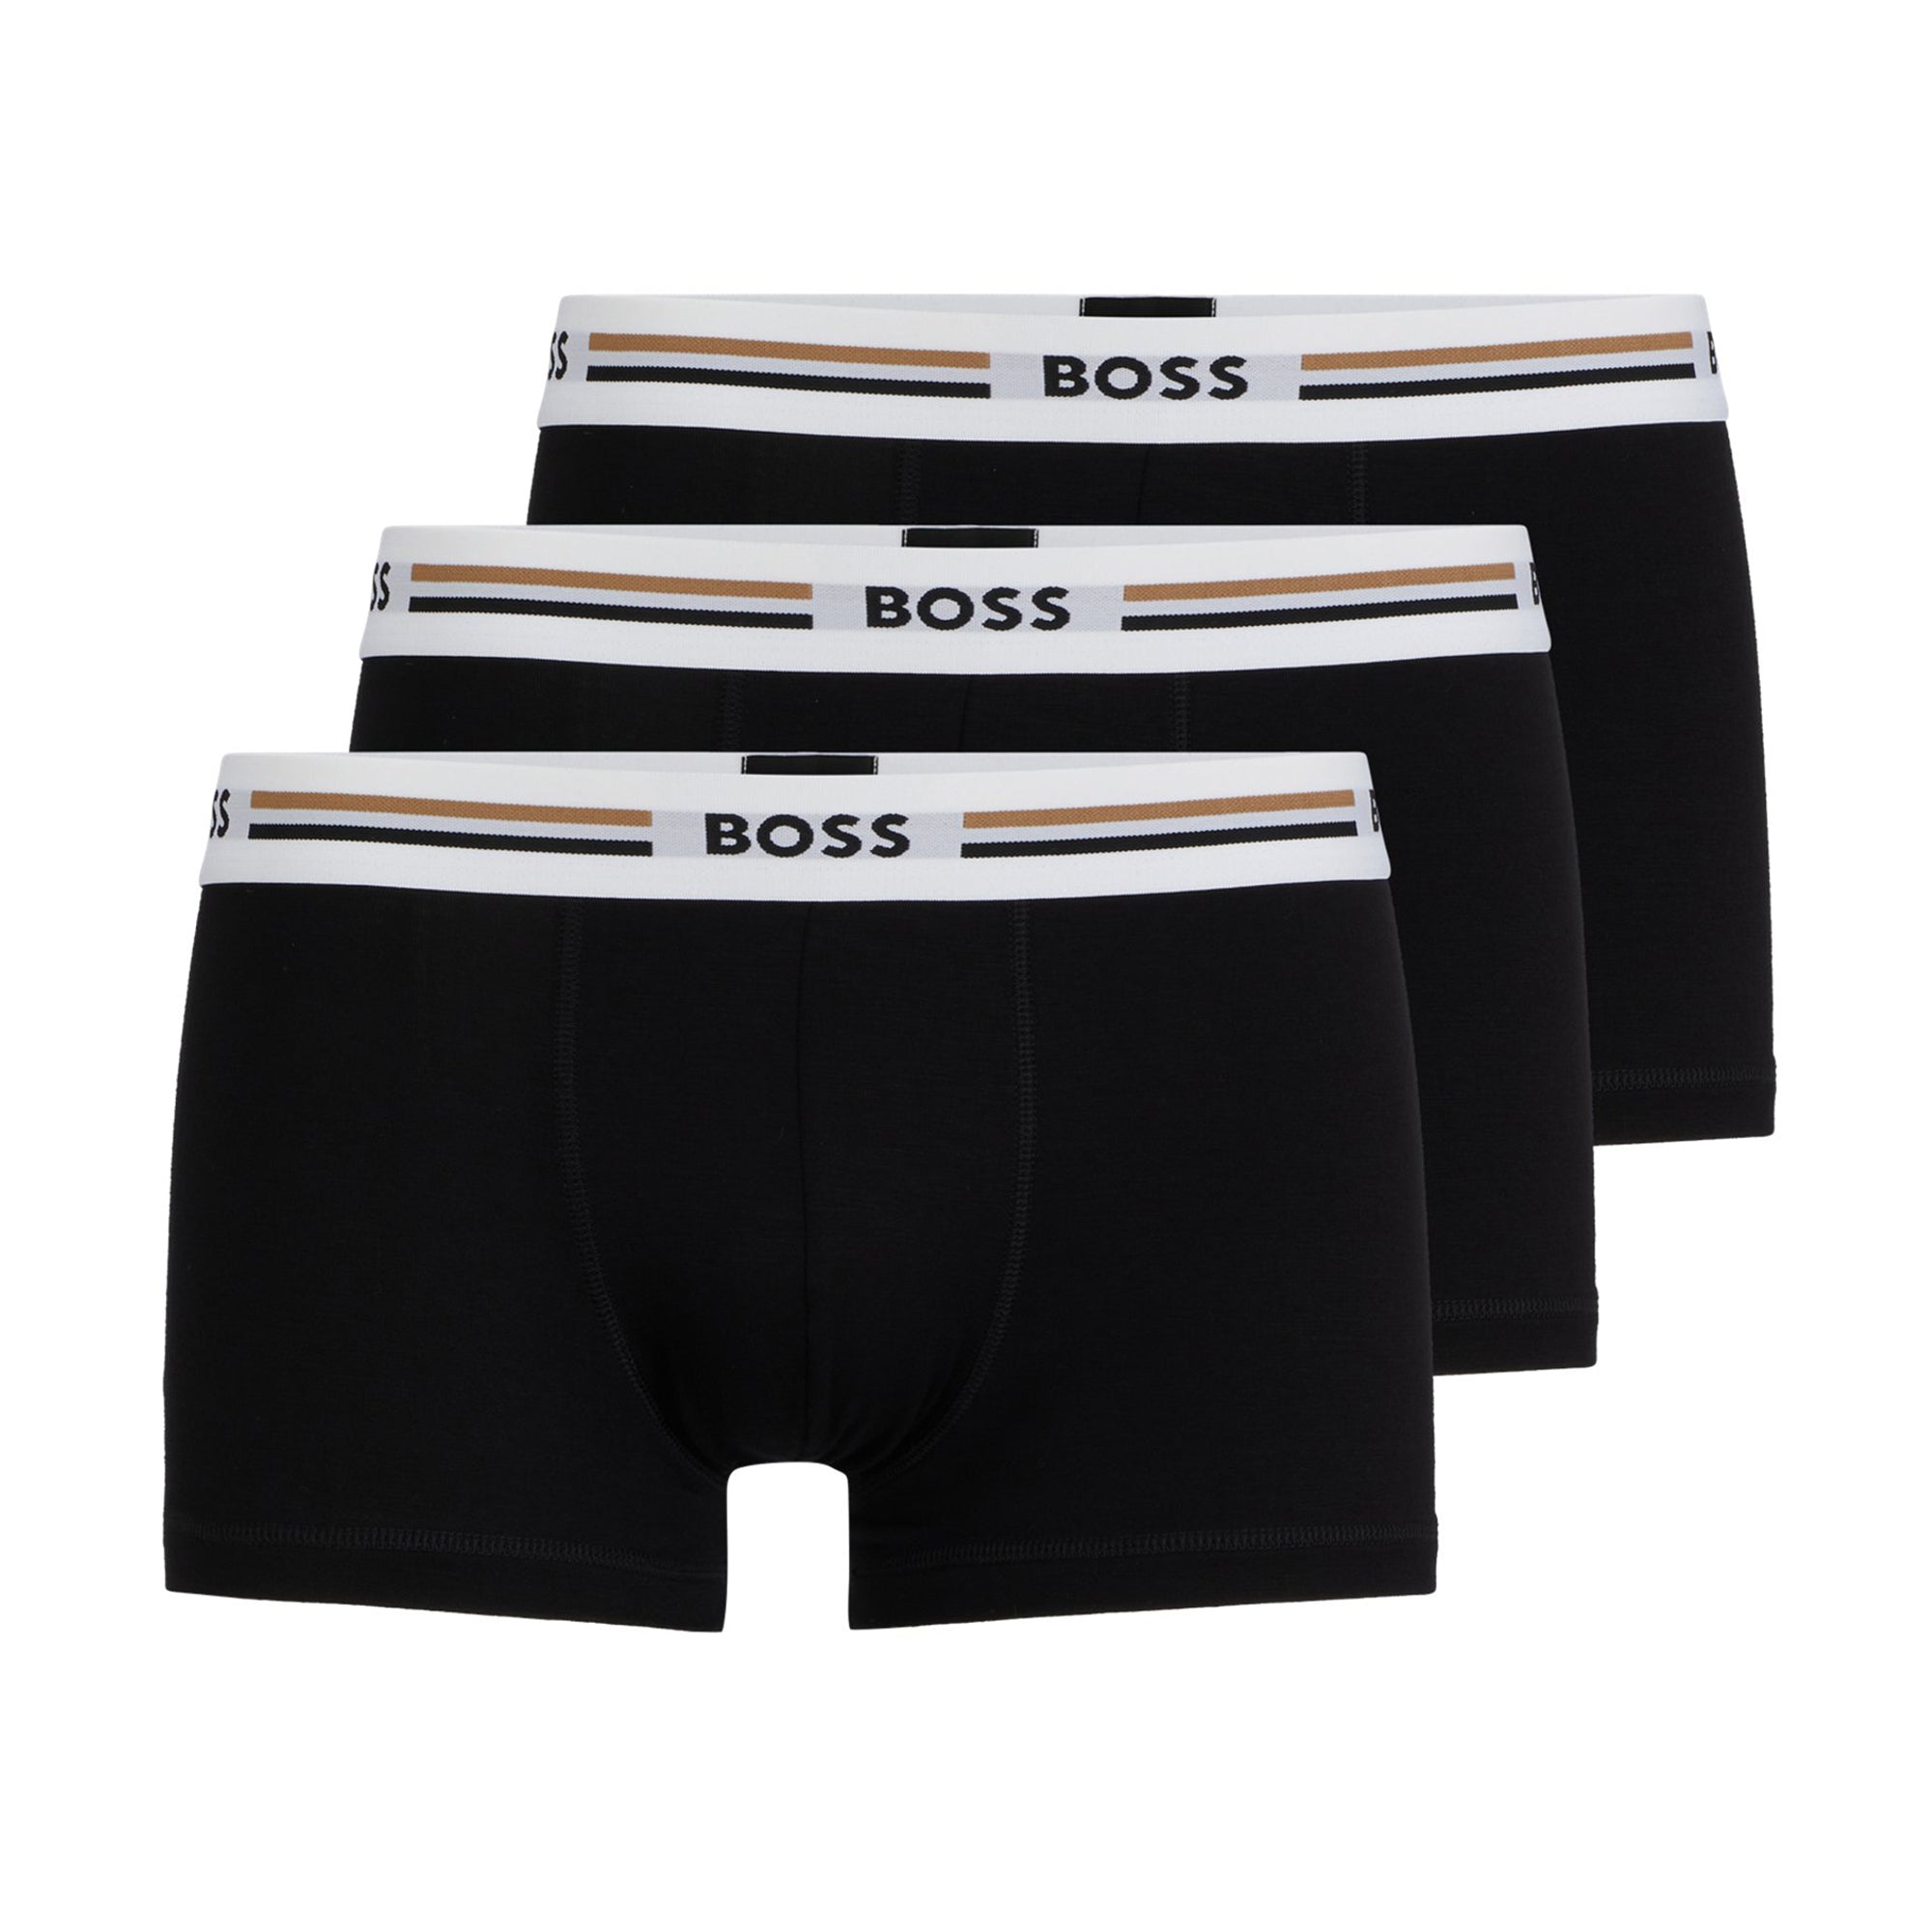 BOSS Revive Trunk 3-Pack